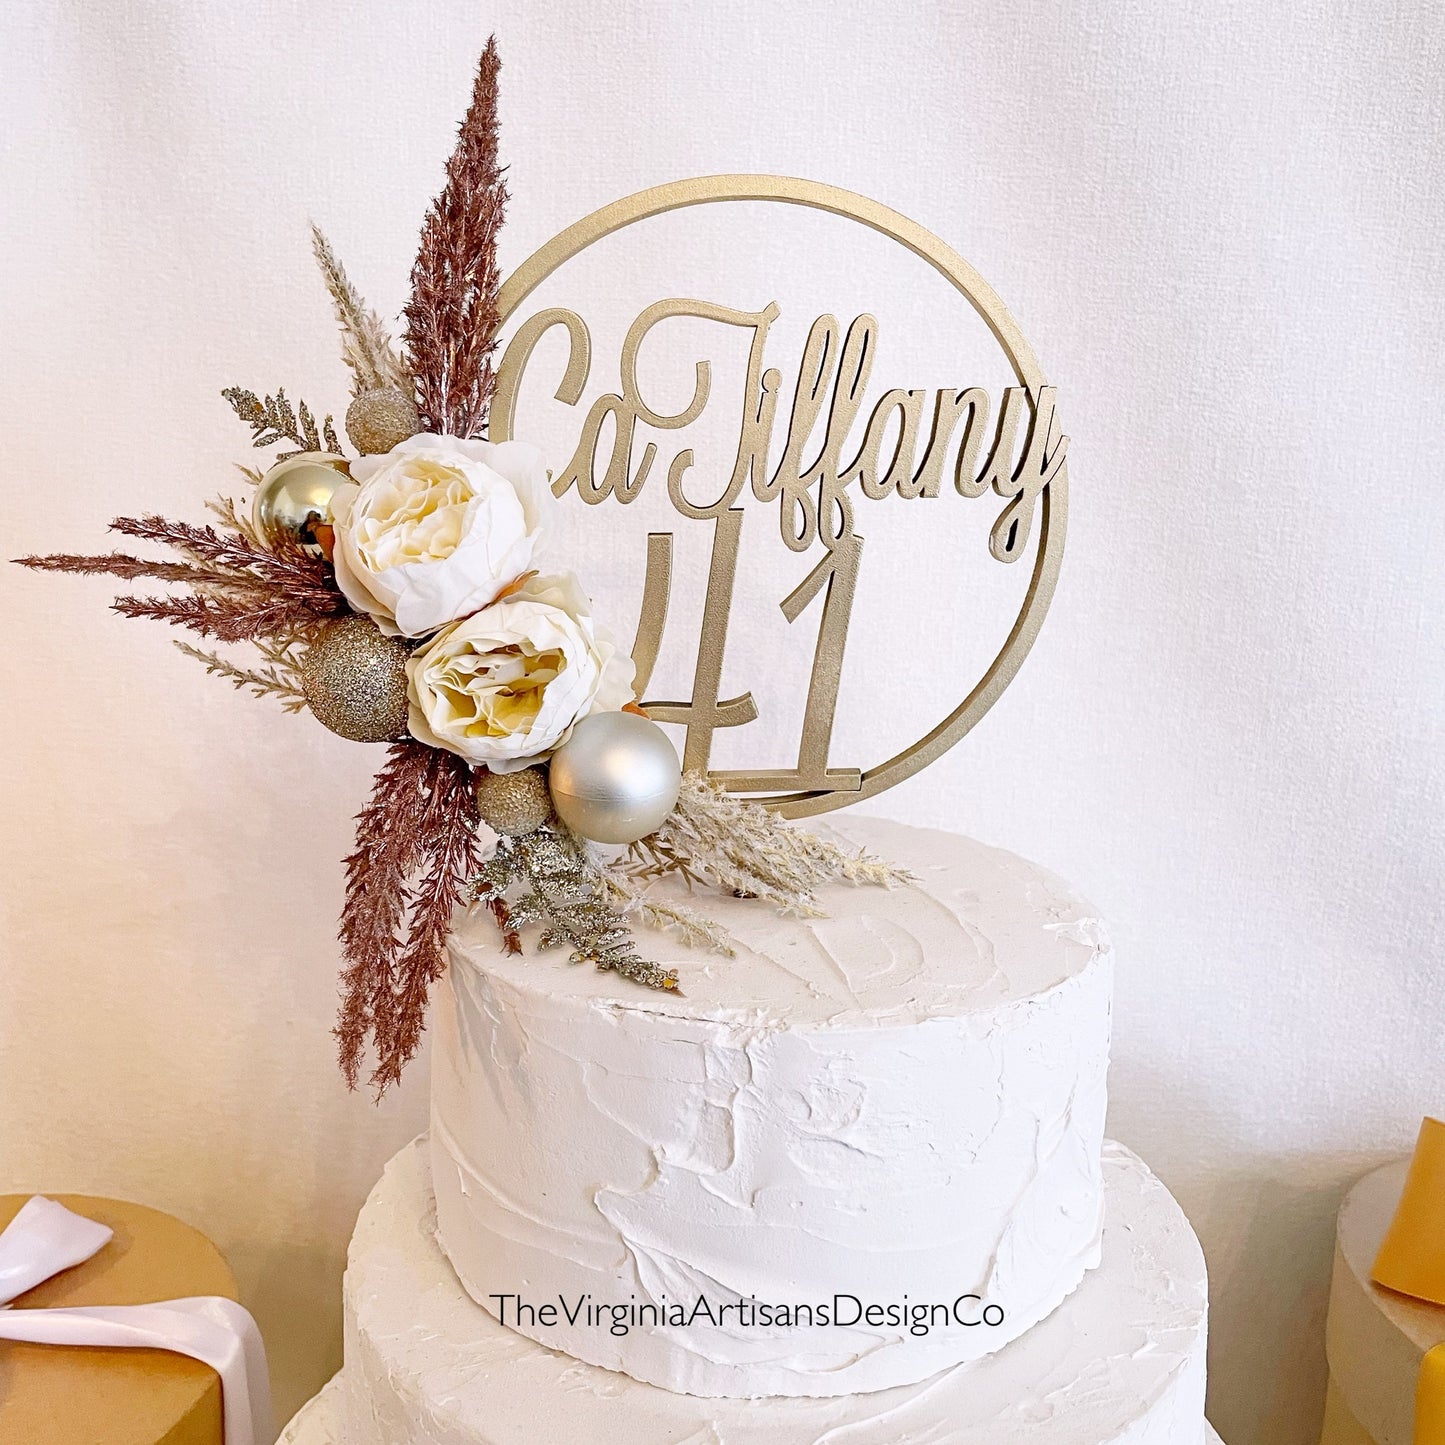 Personalized Birthday Cake Topper with Number and dried flowers - Cream, Silver and Copper Theme